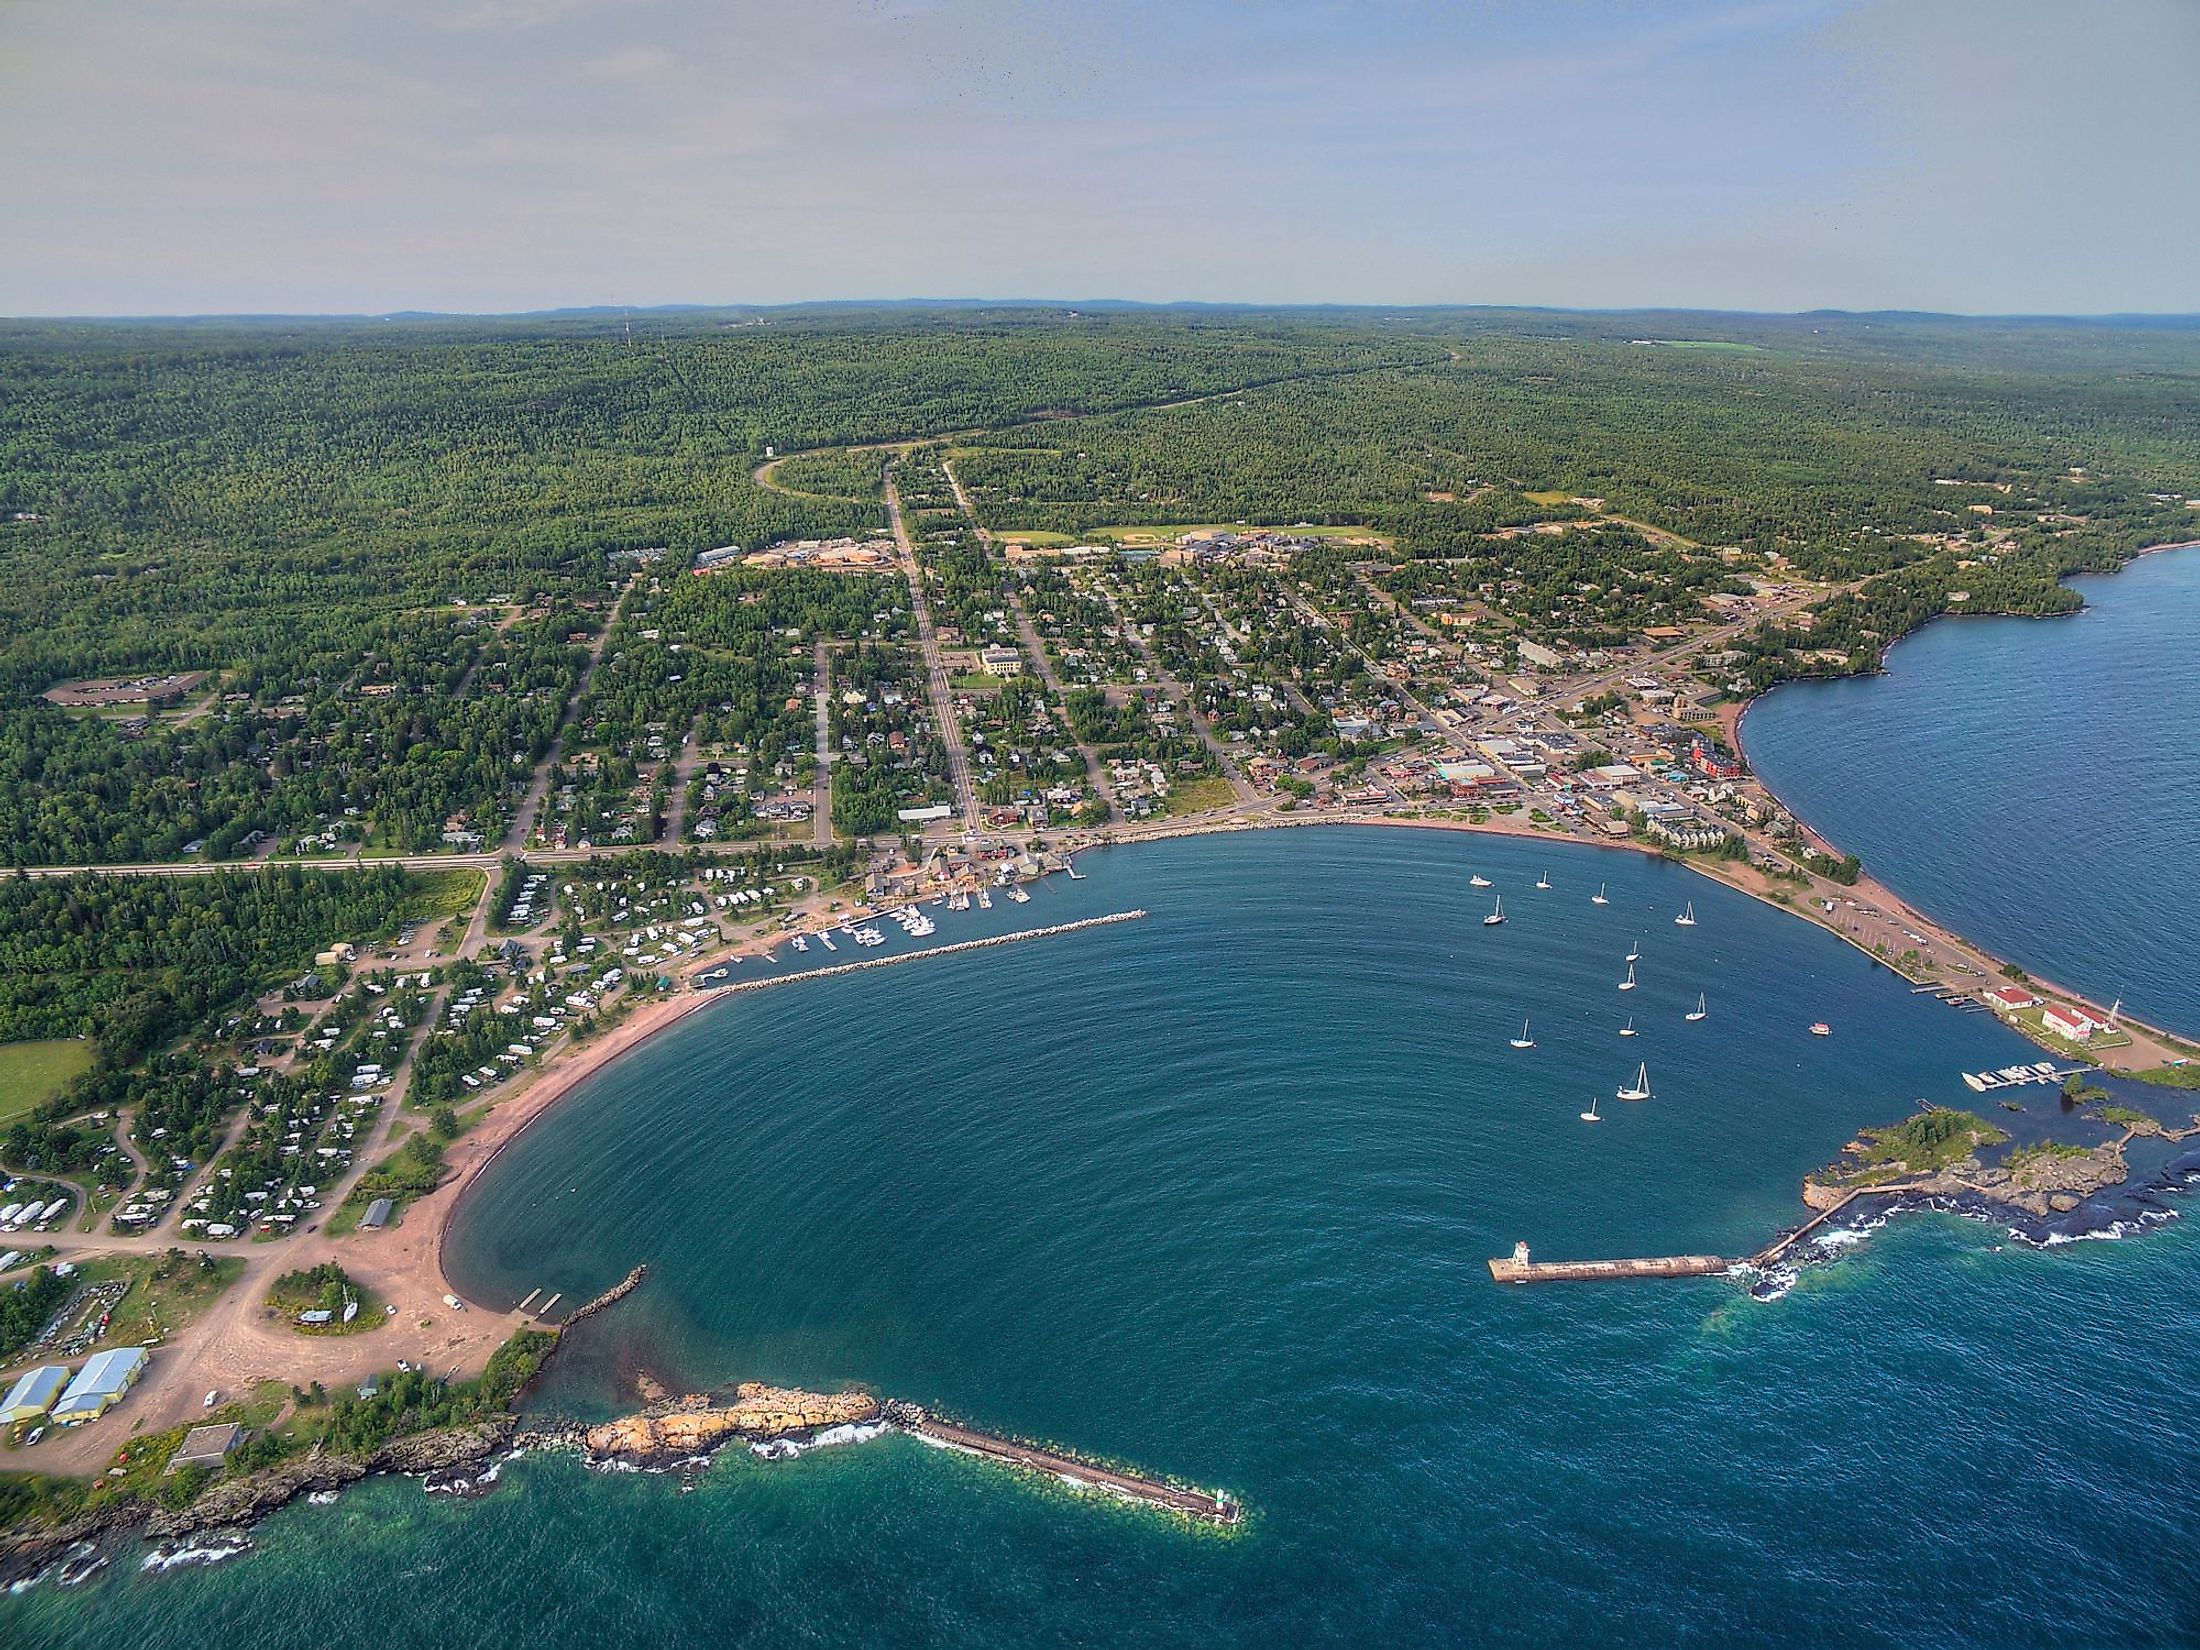 Grand Marais is a small harbor city on the north shore of Lake Superior in Minnesota